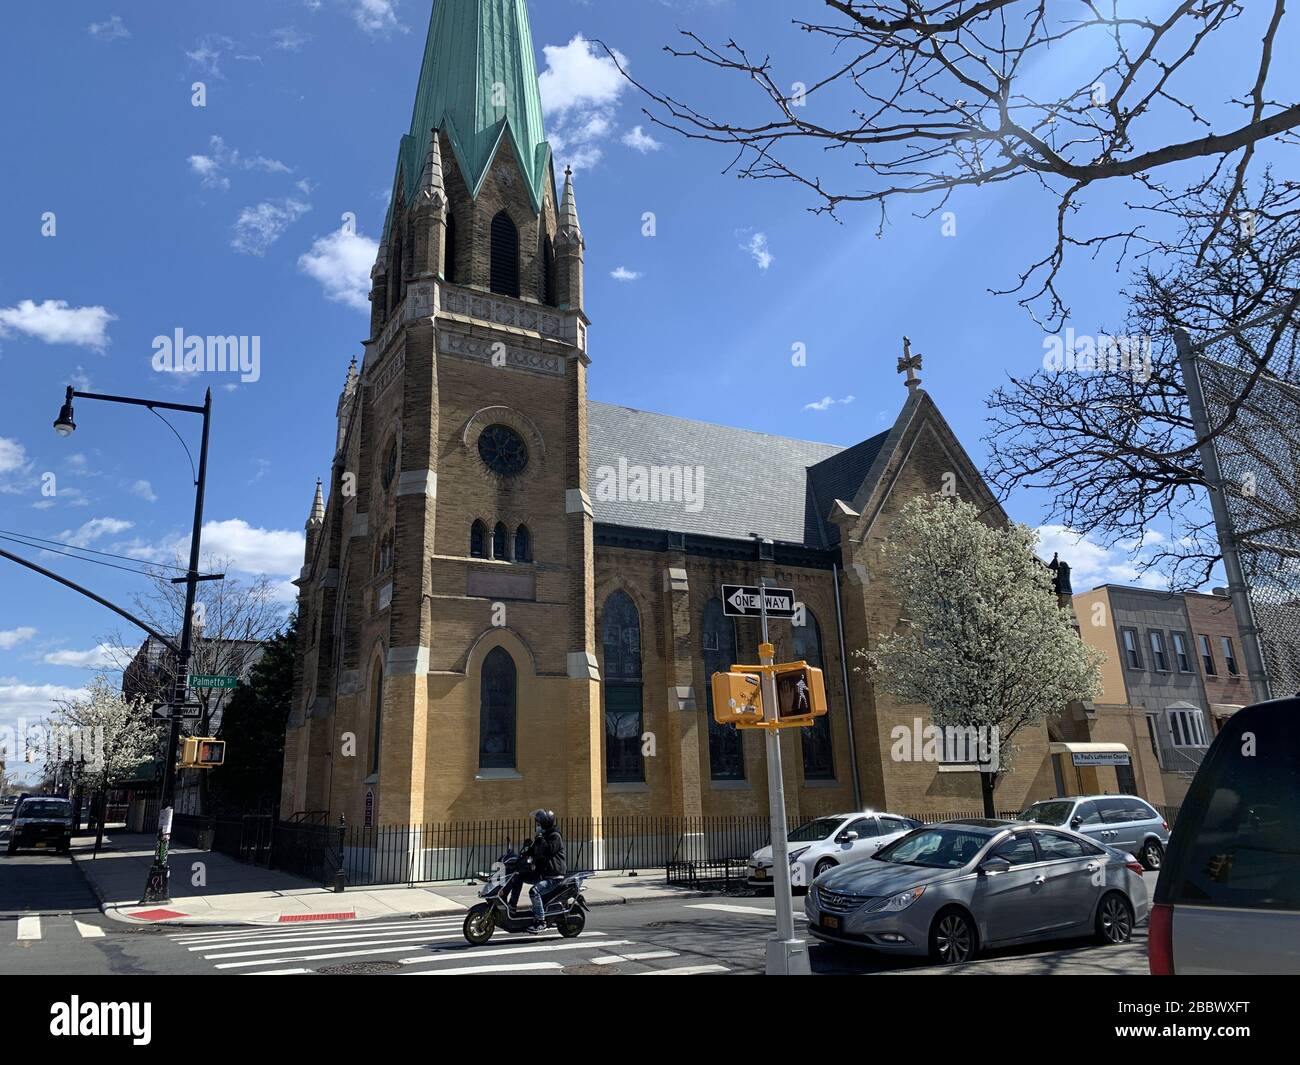 International, Brooklyn, USA. 1st Apr, 2020. (NEW) Covid-19:Closed church.  April 1, 2020, Brooklyn, New York, USA: As a result of the lockdown in New  York, some churches are closed down and can